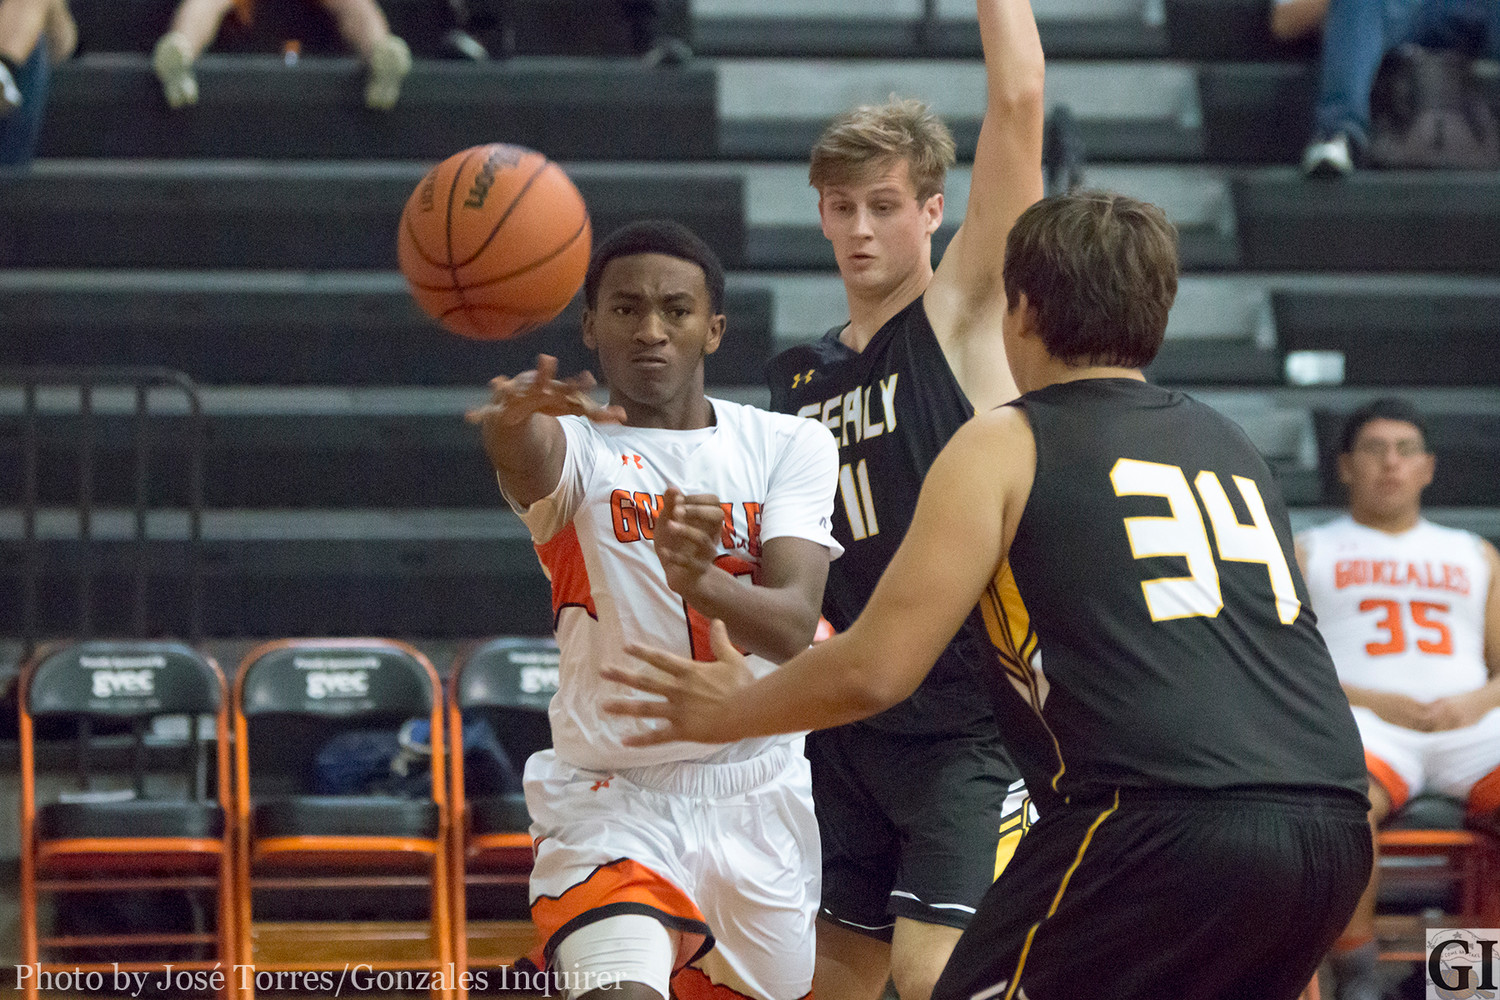 Trevion McNeil (10) passes the ball in Gonzales’ 55-45 loss.